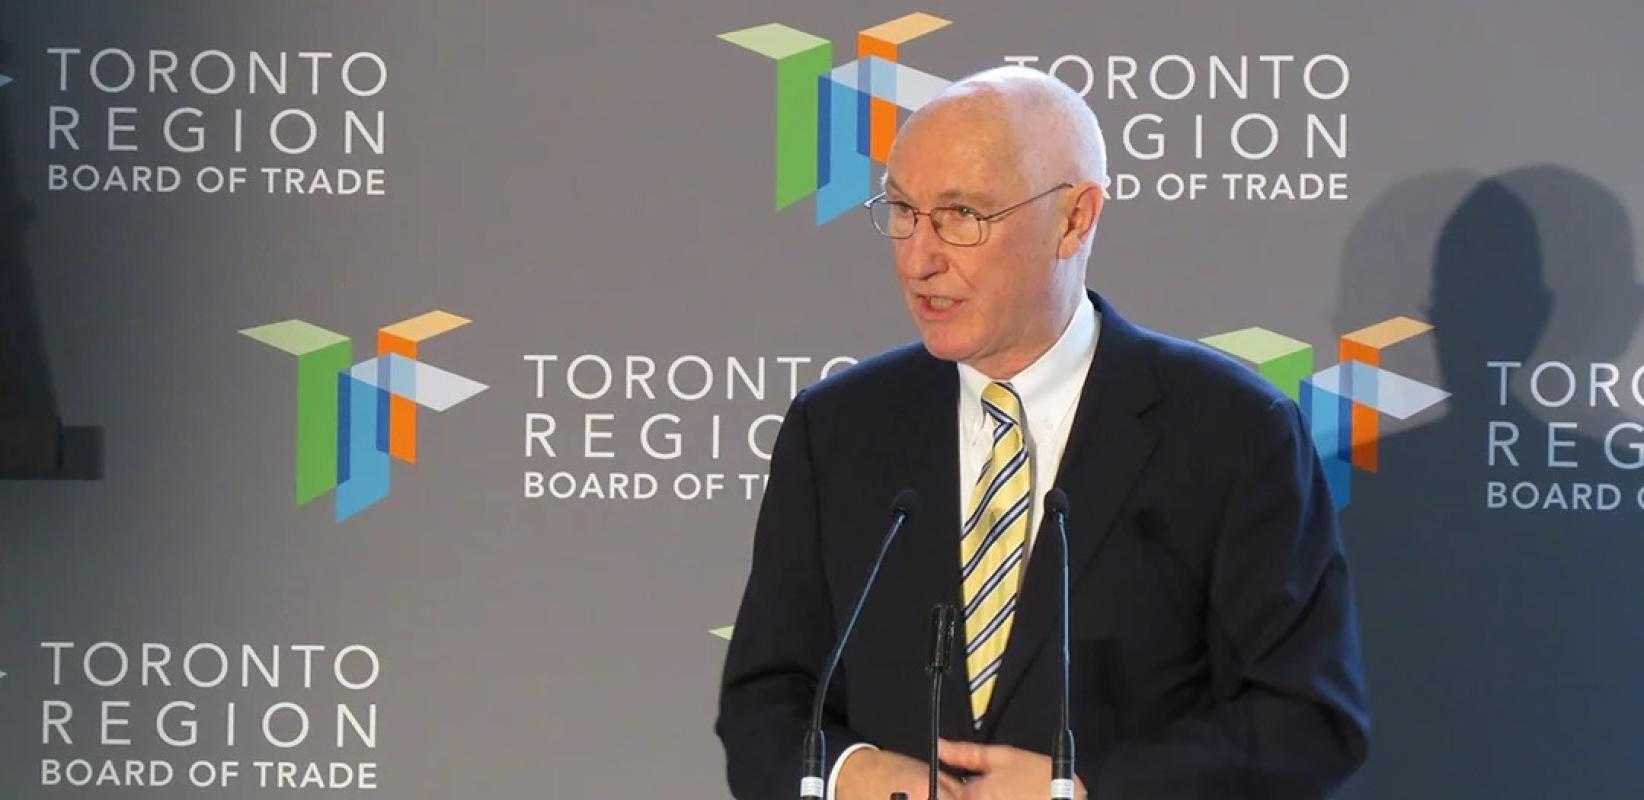 Waterfront Toronto President & CEO John Campbell speaks to the Toronto Region Board of Trade.